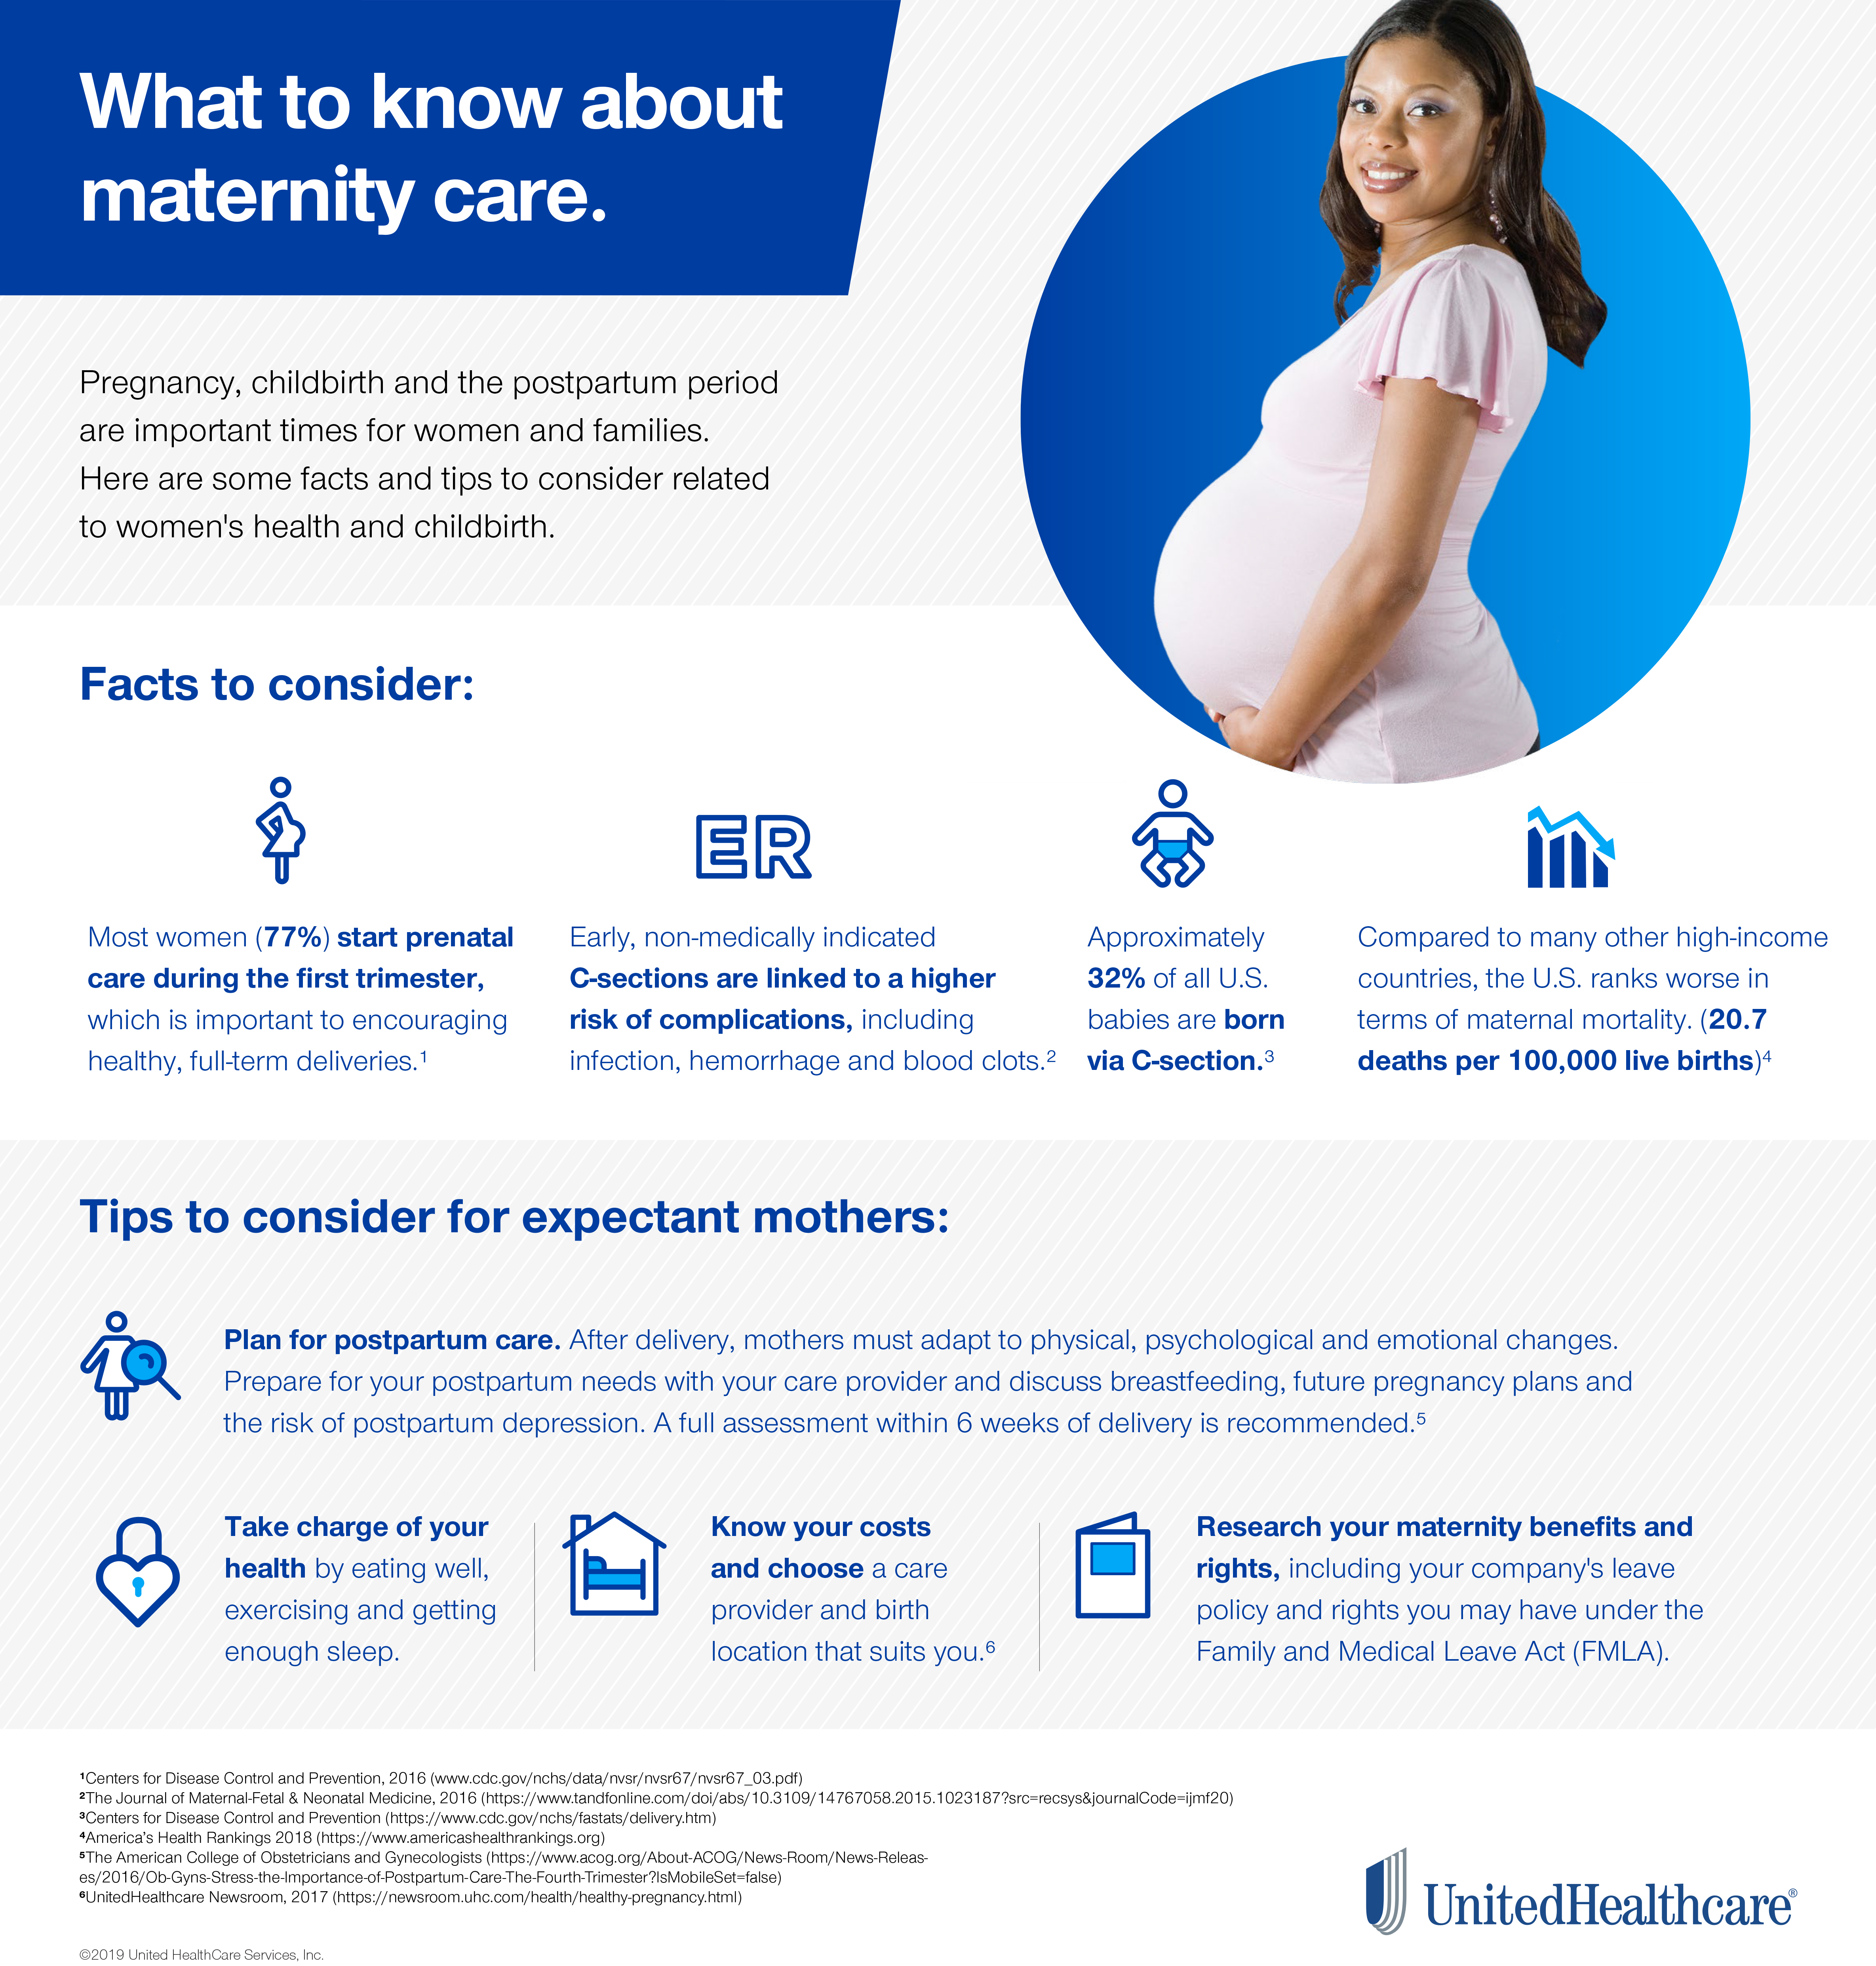 Health Coverage Options for Pregnant or Soon to Be Pregnant Women